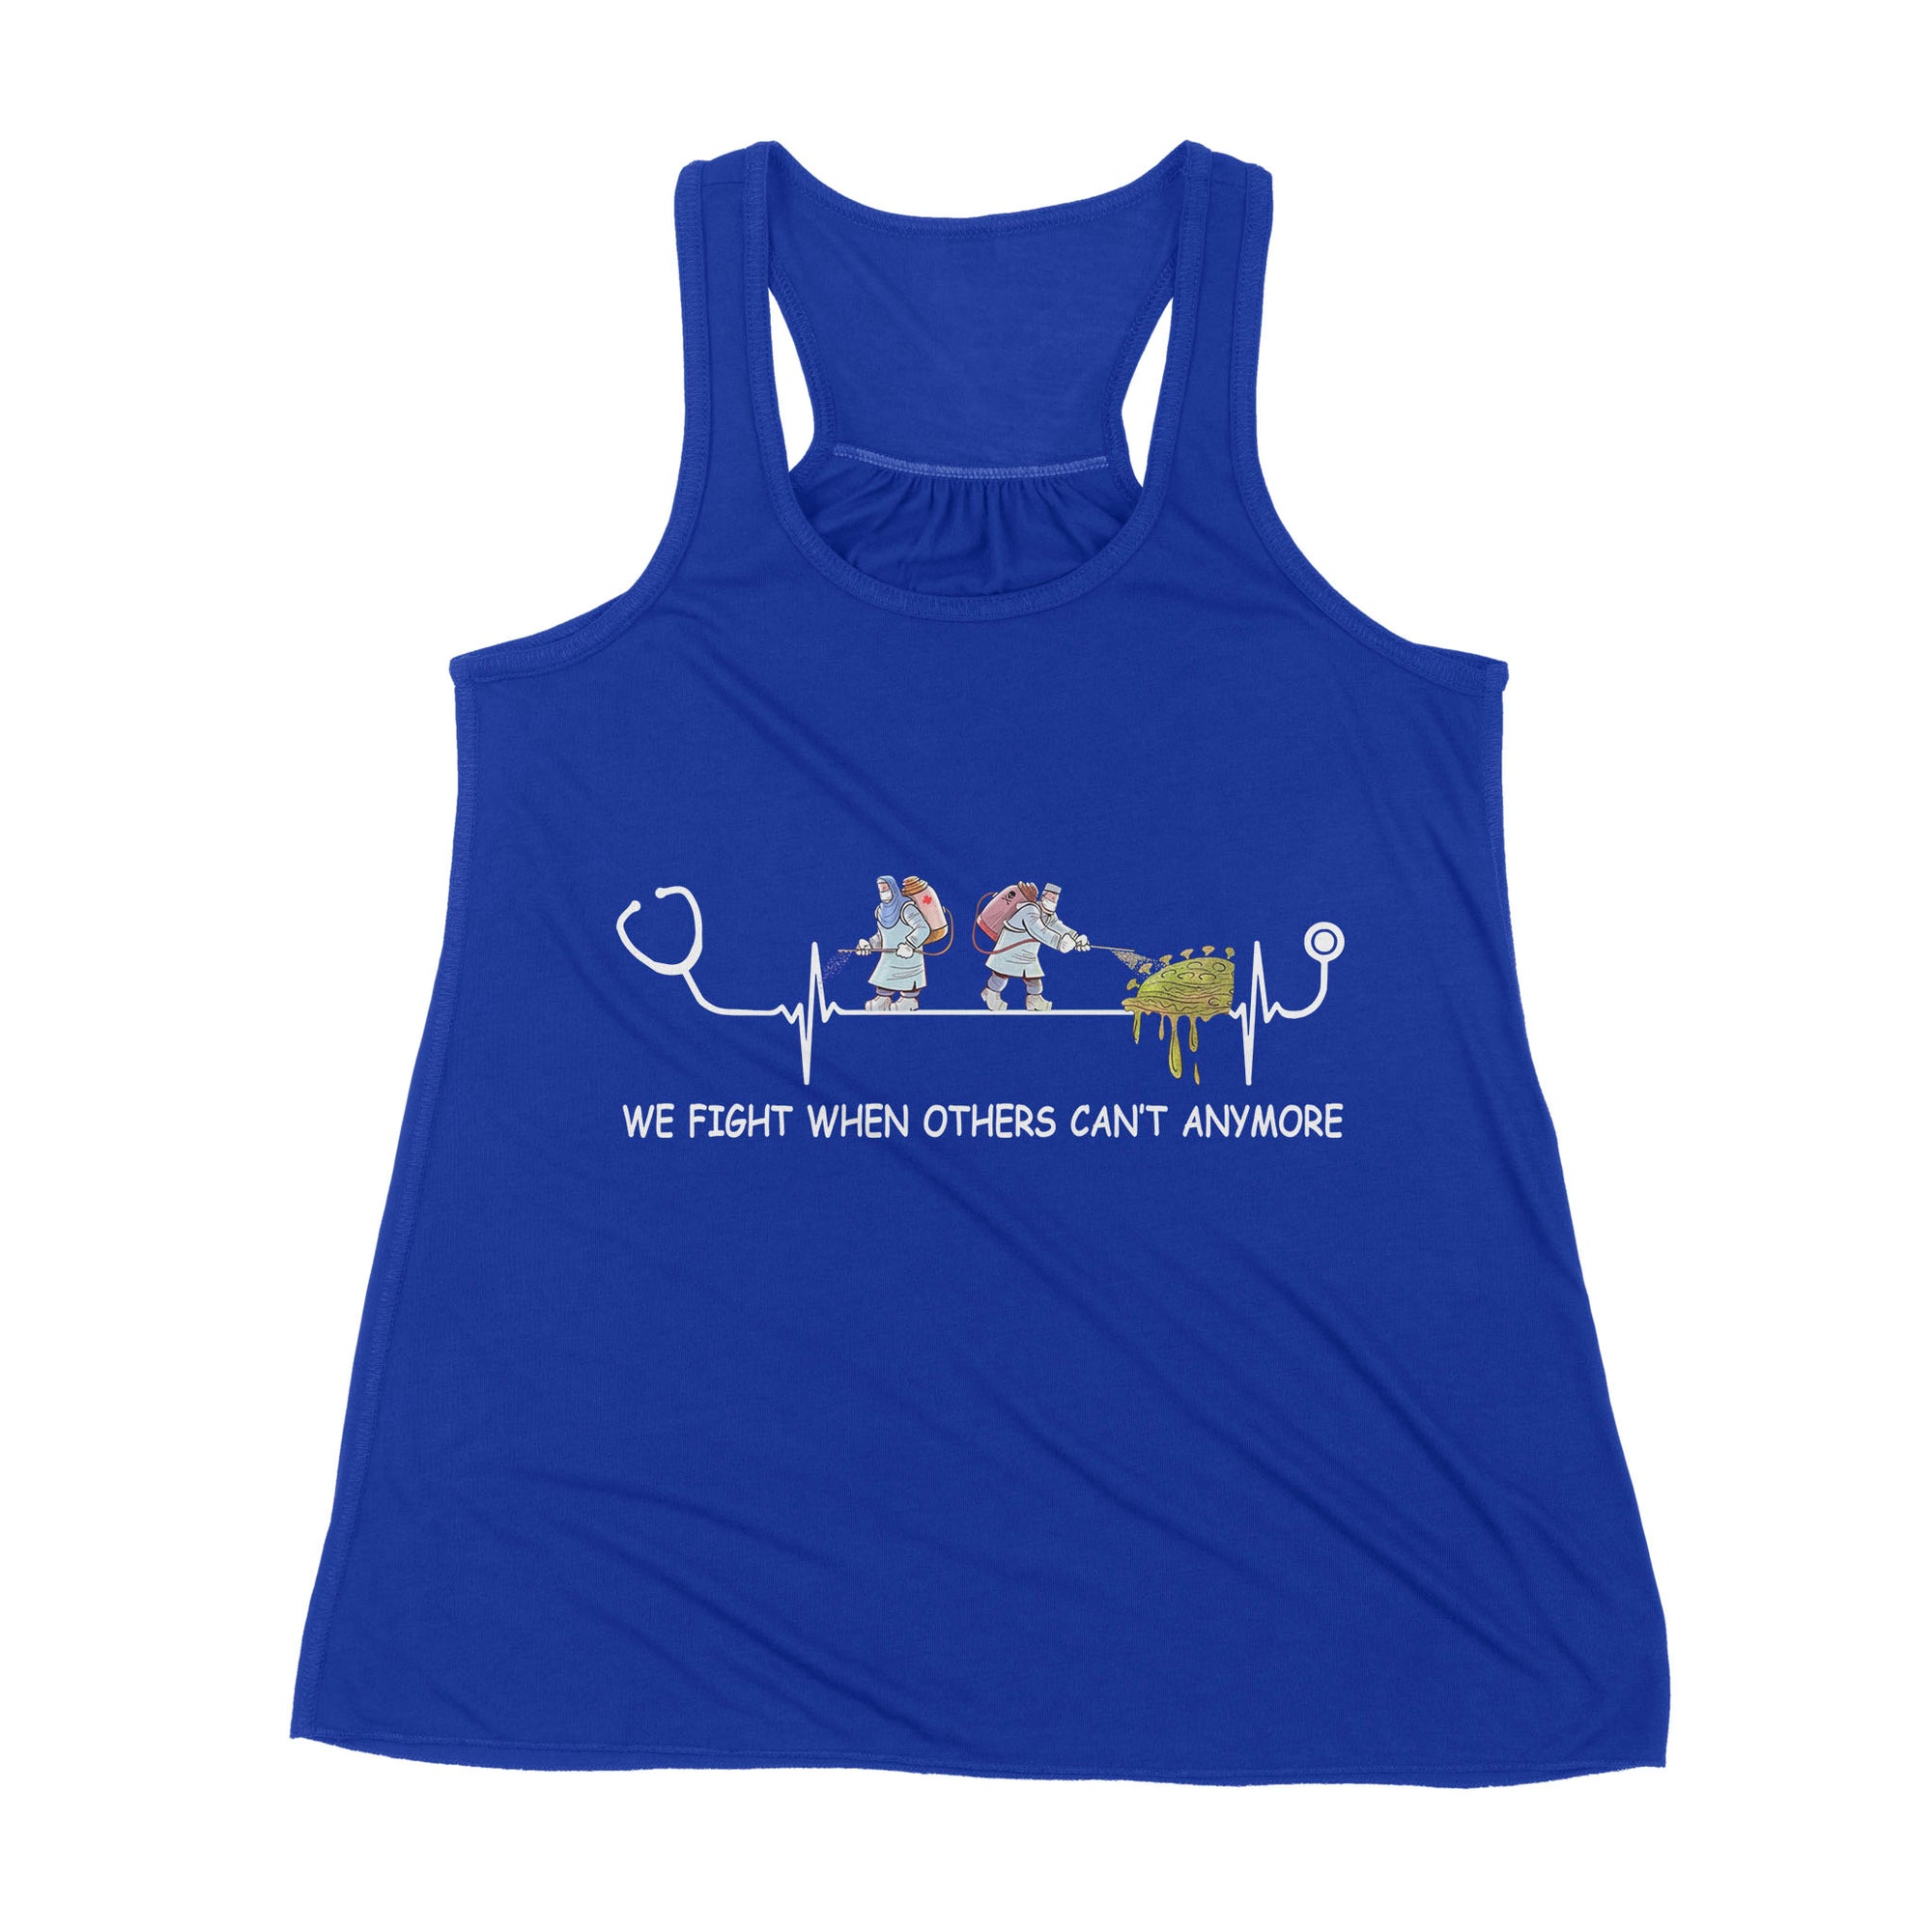 We Fight When Others Can’t Anymore Nurse - Premium Women's Tank